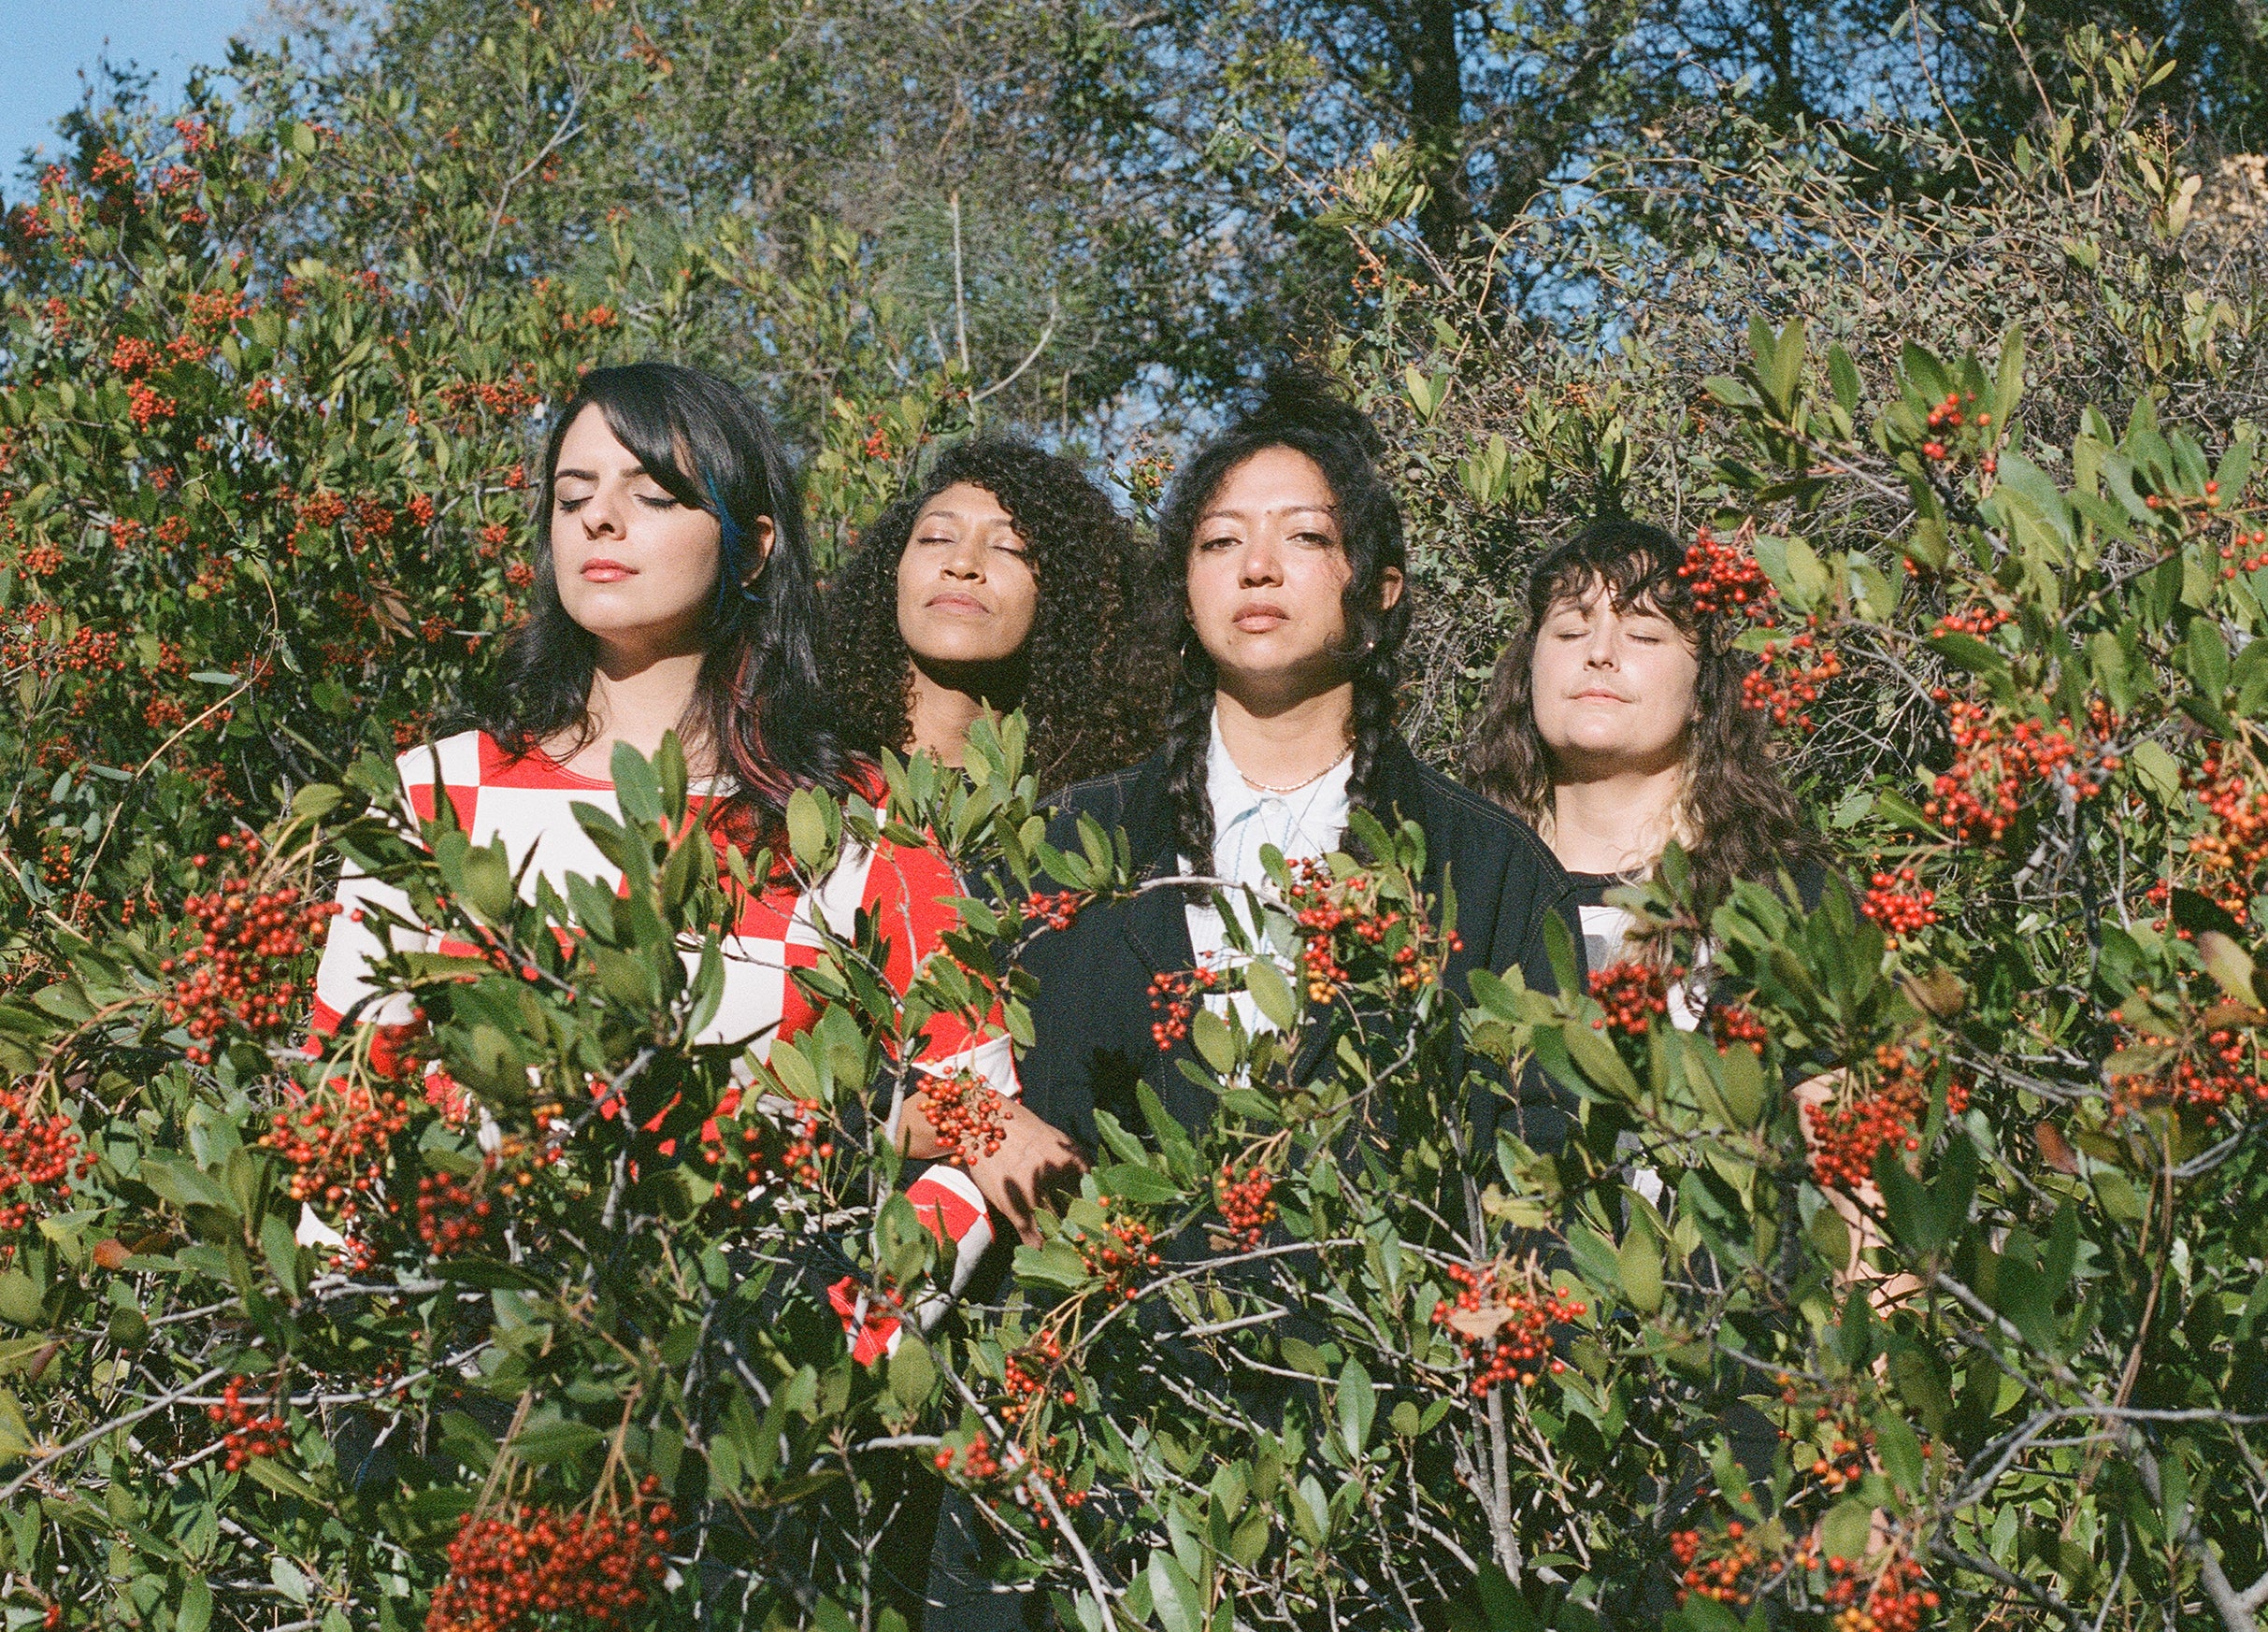 La Luz presale password for approved tickets in Madison